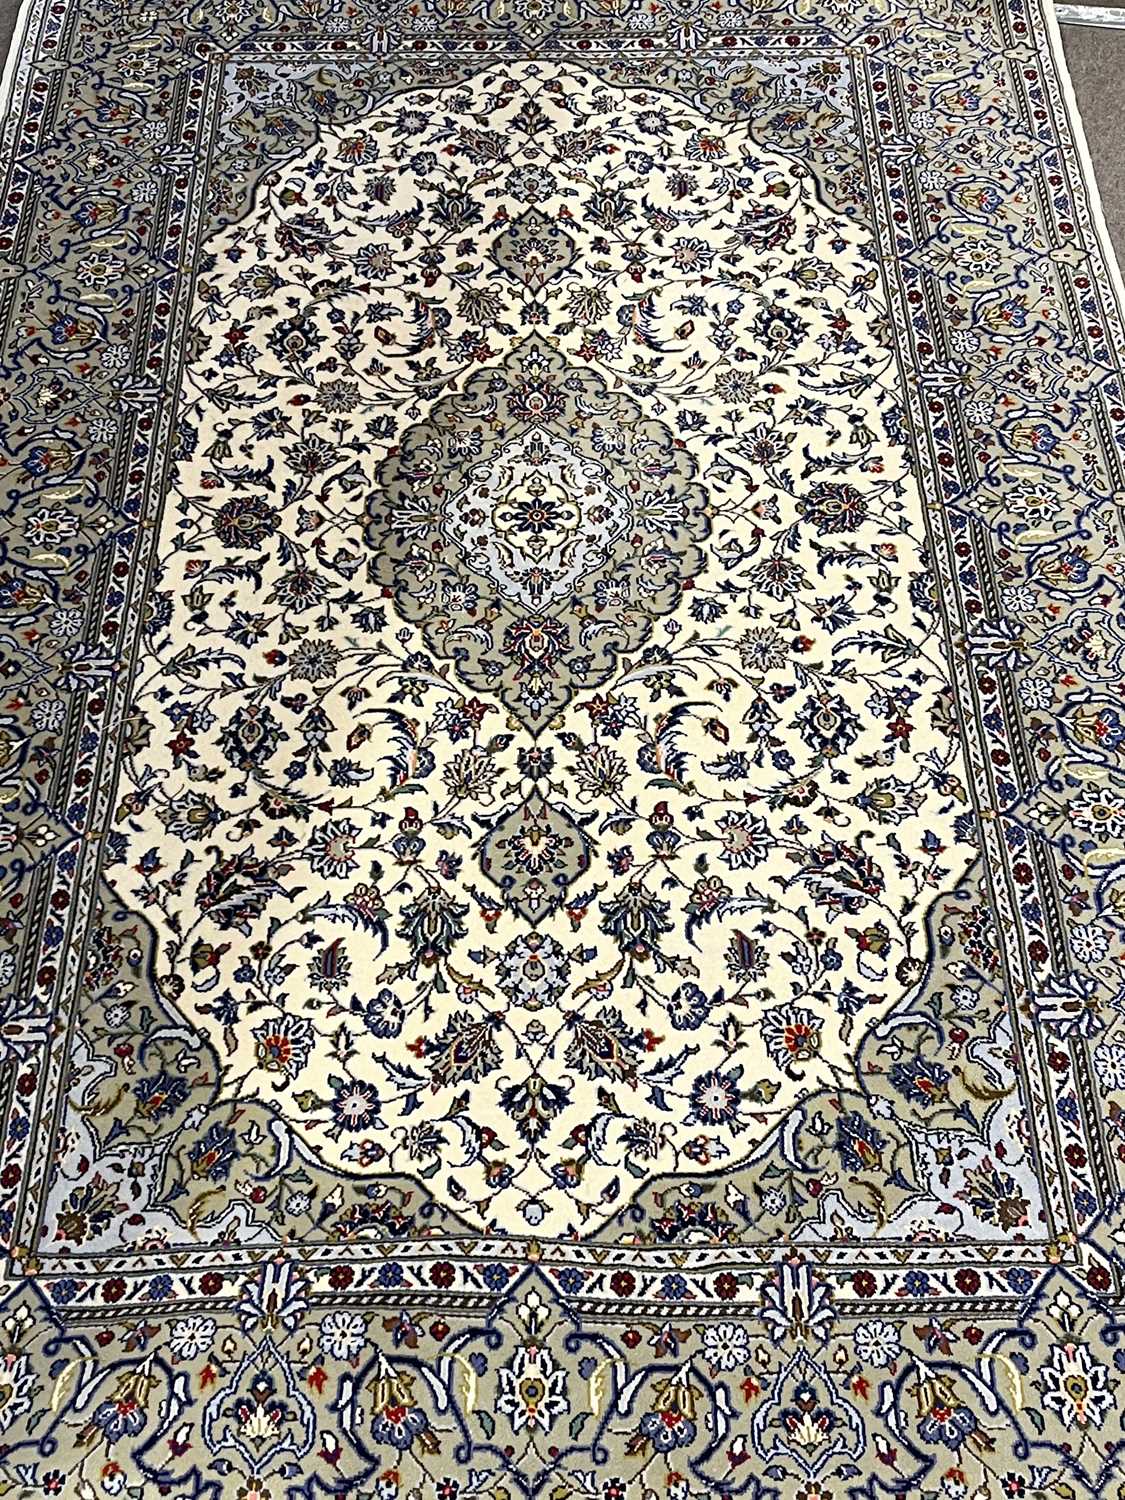 A floral decorated Iranian silk mix floral carpet 140 x 240cm - Image 2 of 4